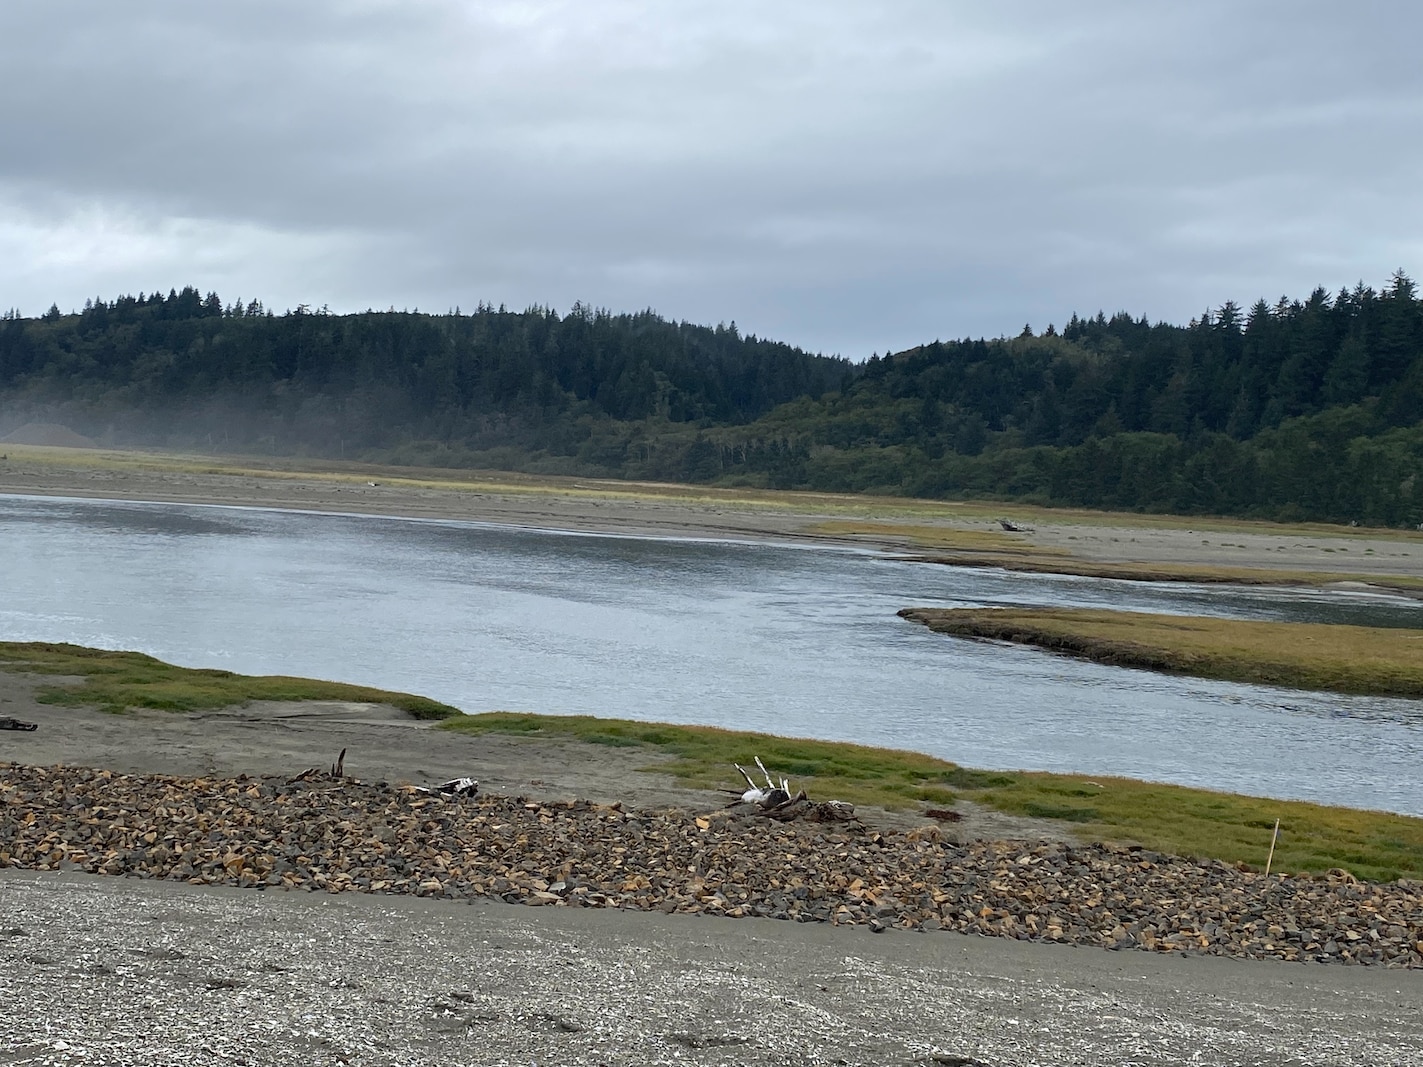 Photo of Willapa Bay, one of the largest estuarine systems on the Pacific Ocean coast of Washington State.